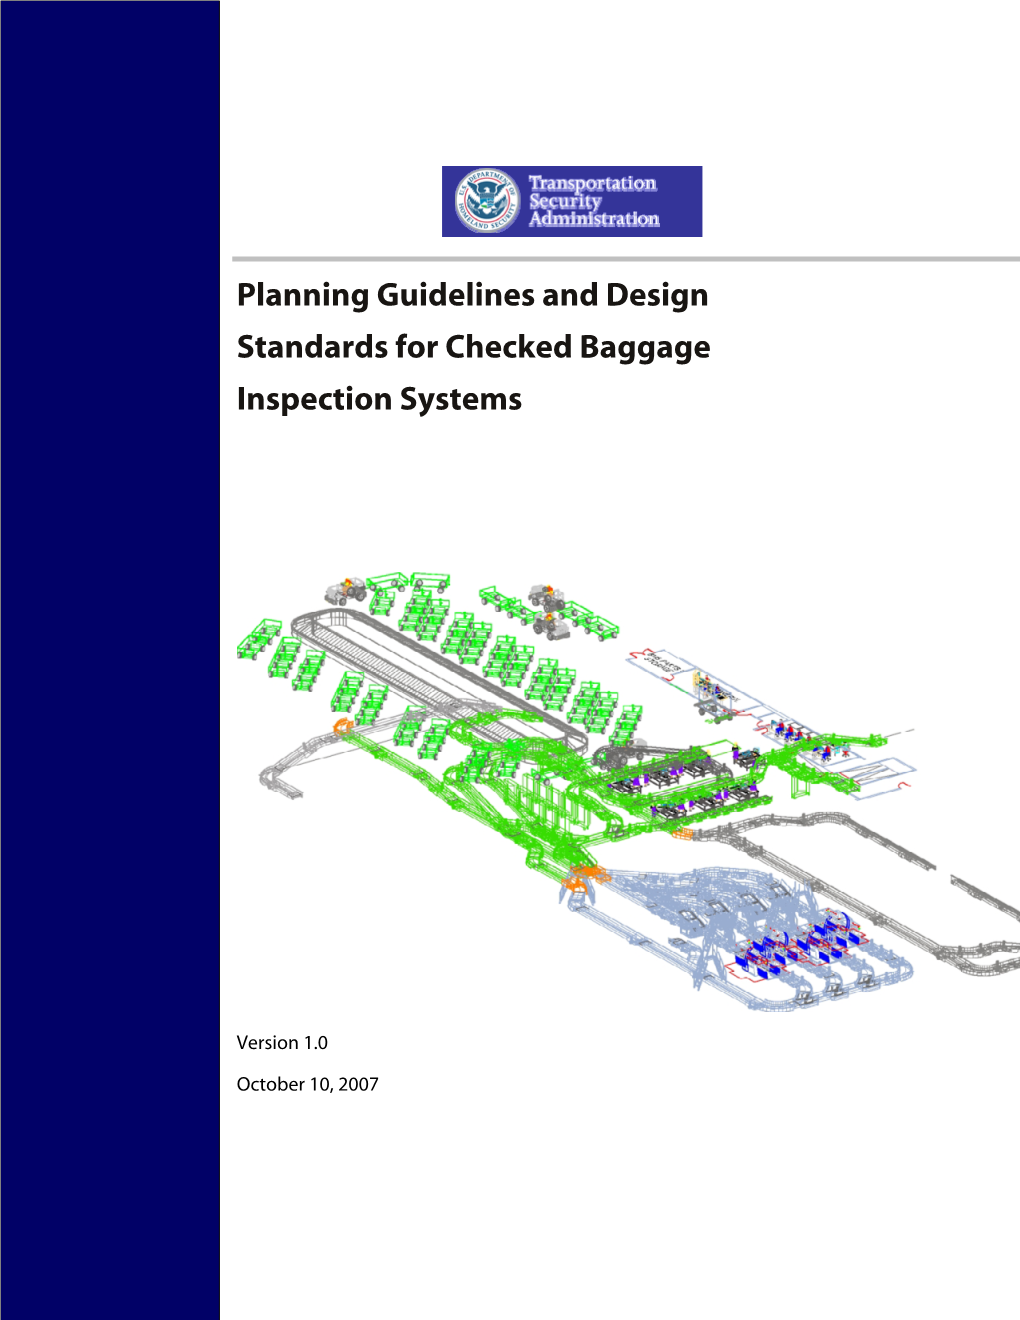 Planning Guidelines and Design Standards for Checked Baggage Inspection Systems